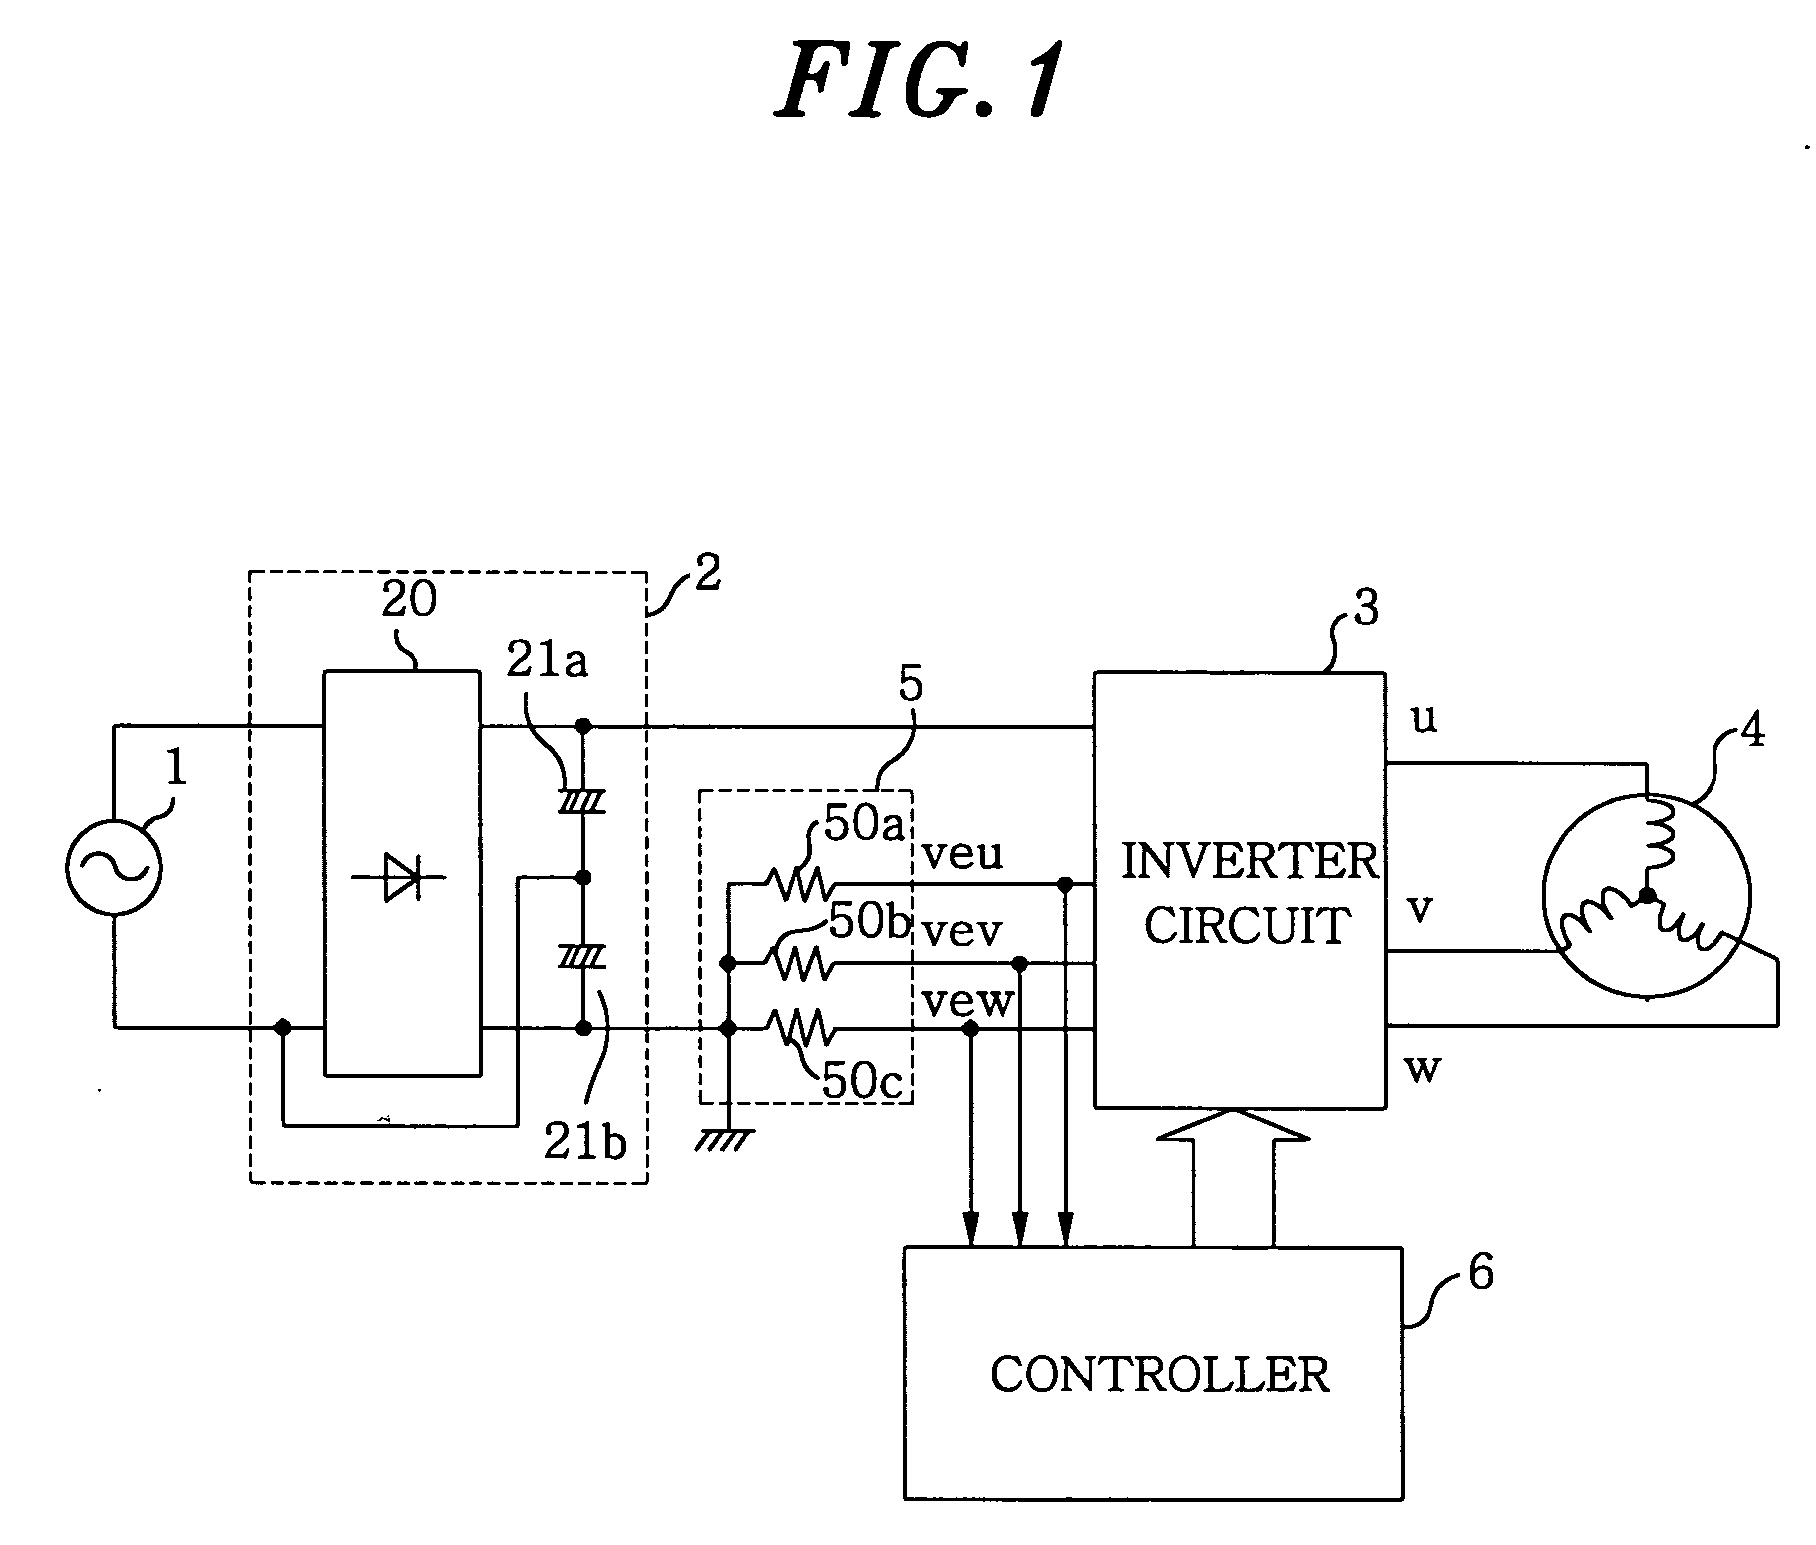 Motor driving apparatus for use in a diswasher